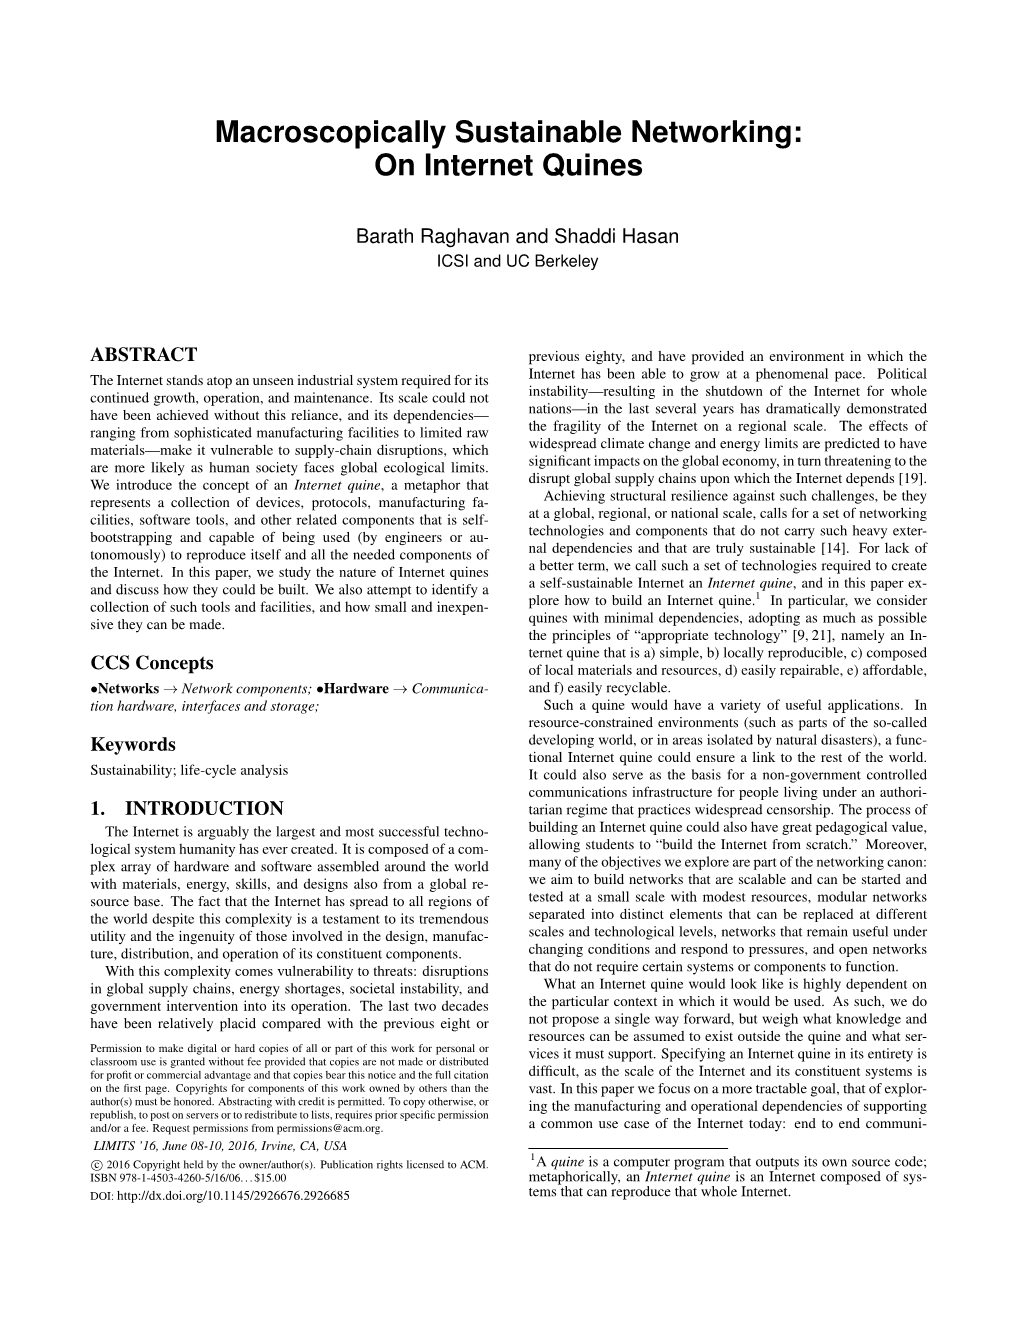 Macroscopically Sustainable Networking: on Internet Quines